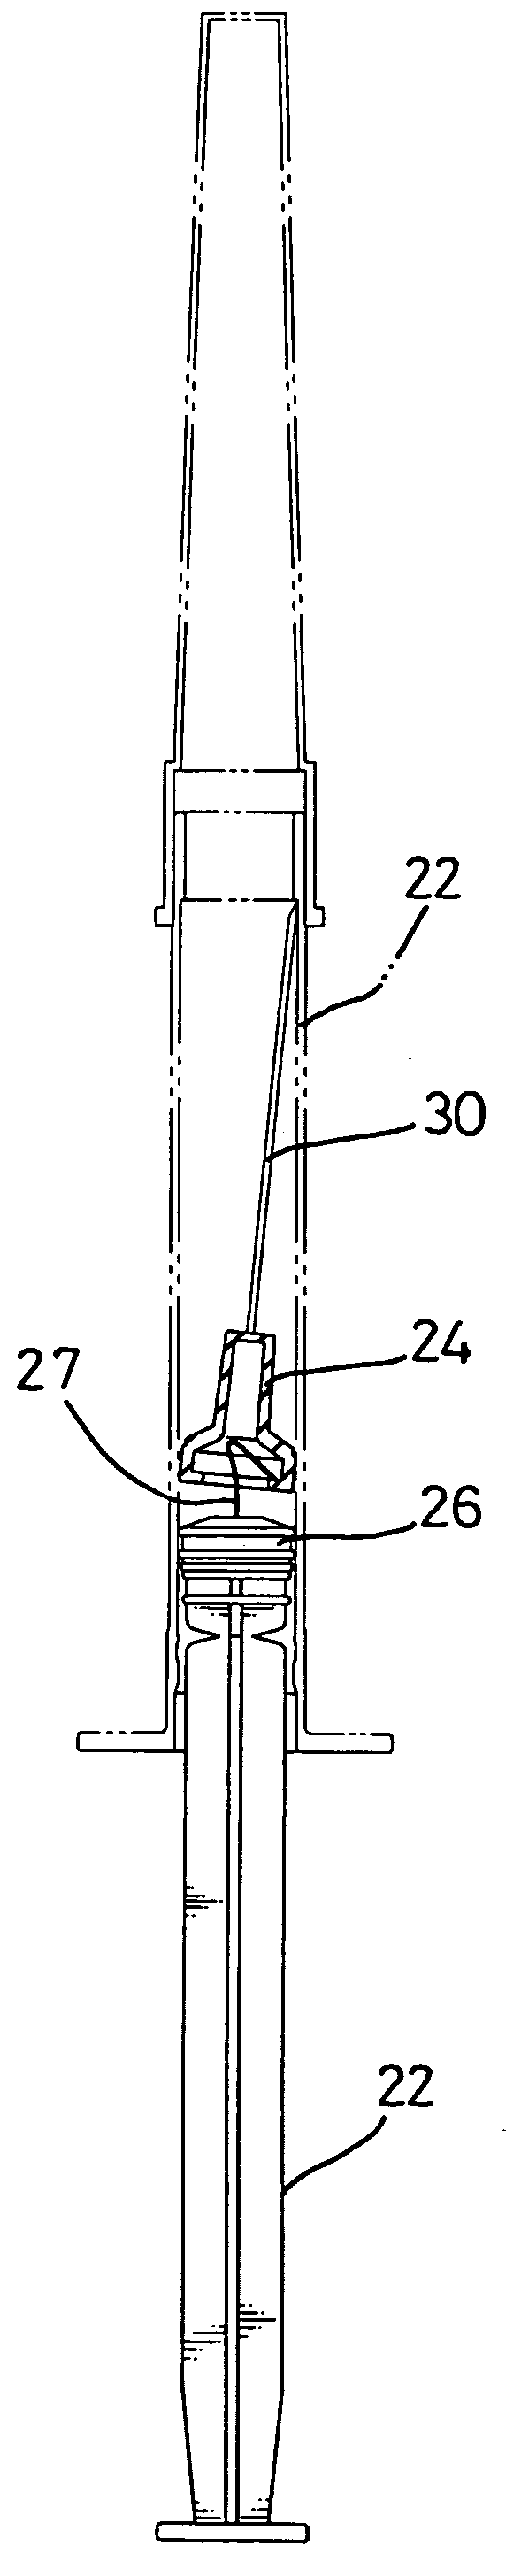 Retracting device for a safety syringe